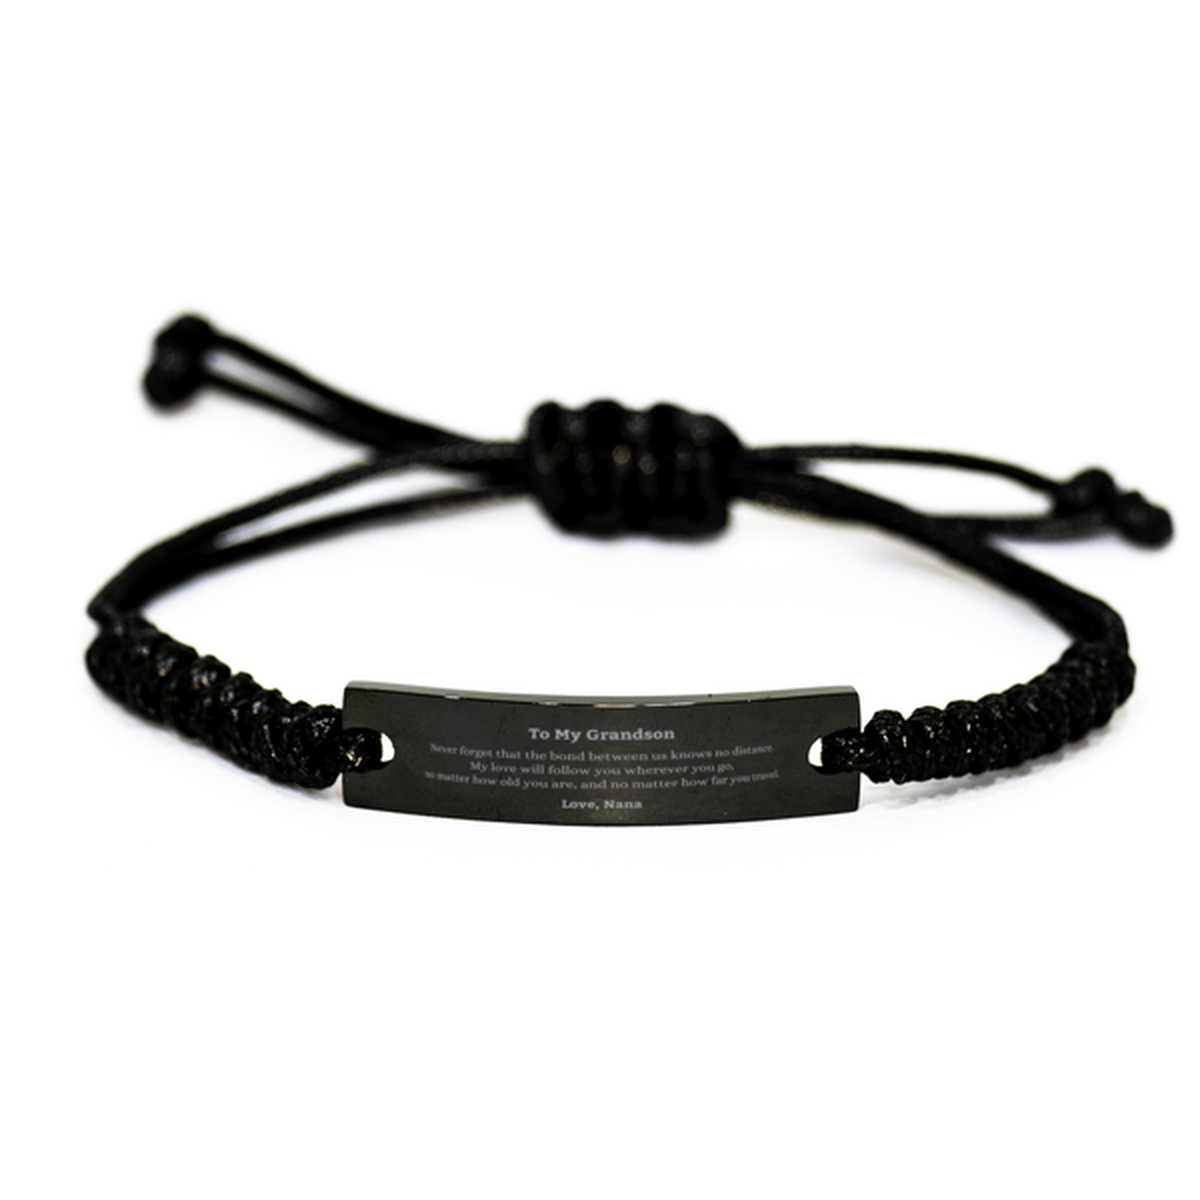 Grandson Birthday Gifts from Nana, Adjustable Black Rope Bracelet for Grandson Christmas Graduation Unique Gifts Grandson Never forget that the bond between us knows no distance. Love, Nana